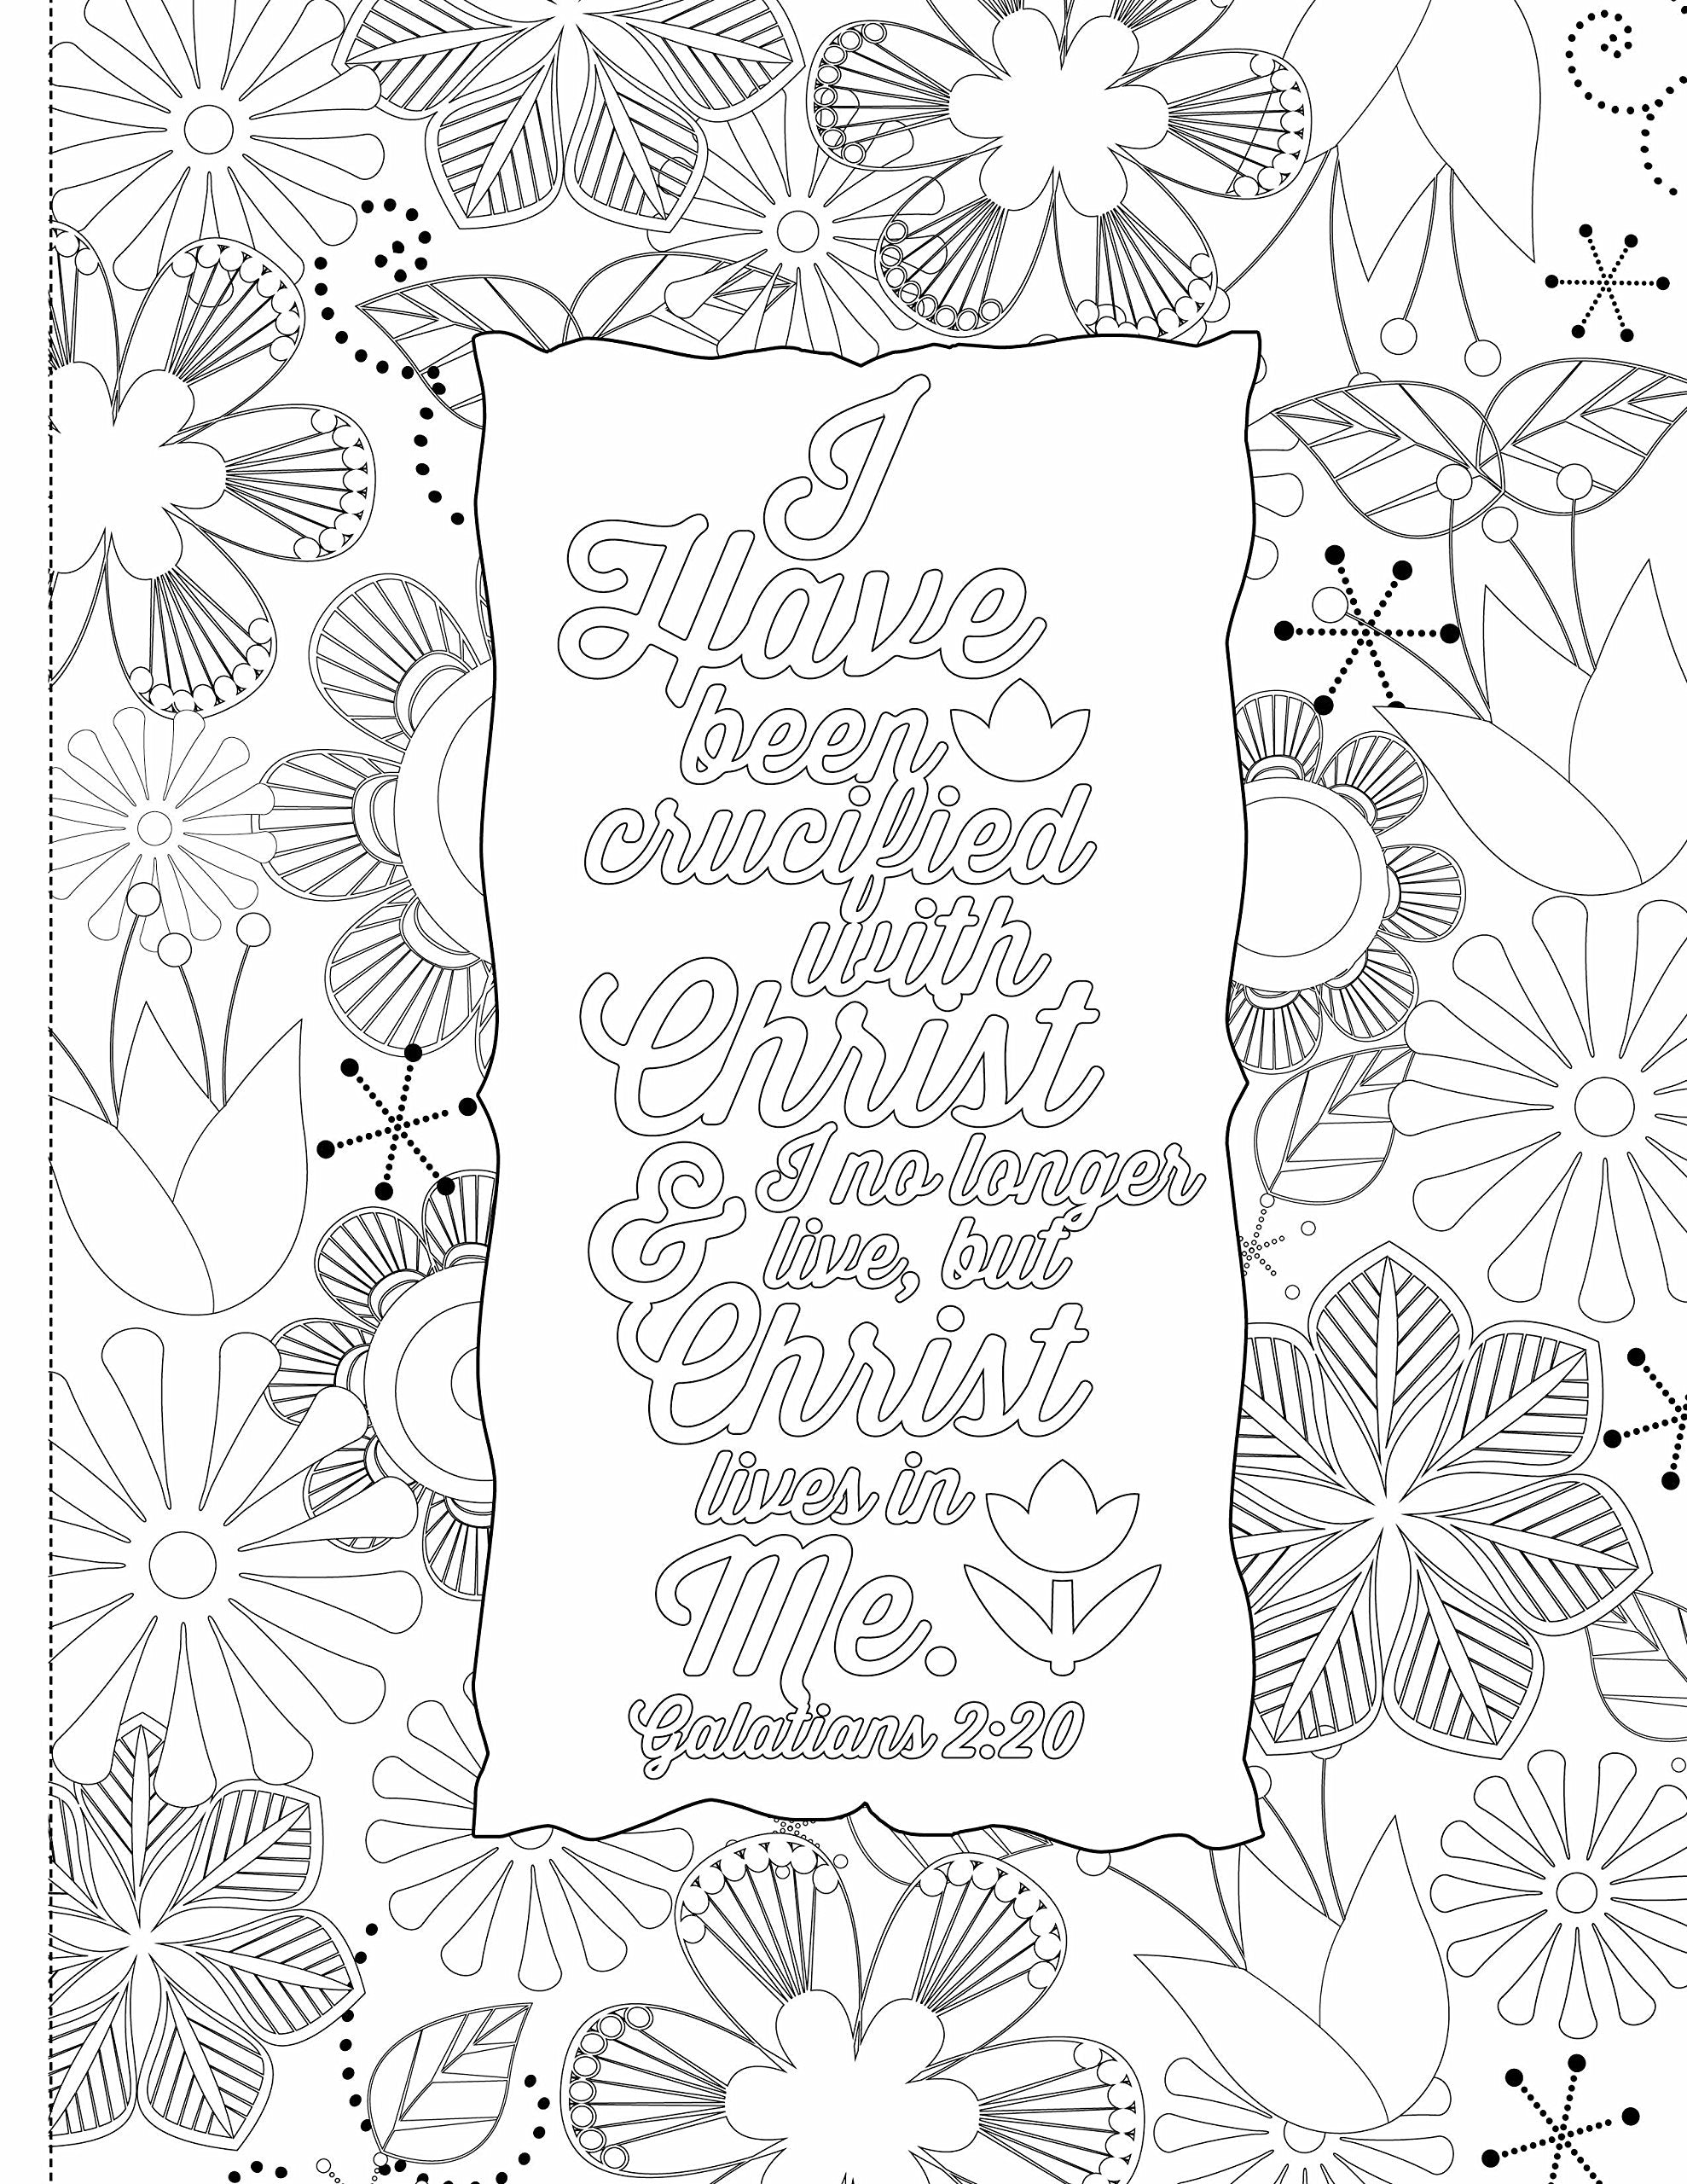 Chapter by Chapter Bible Study Journal & Coloring Book – Scripture